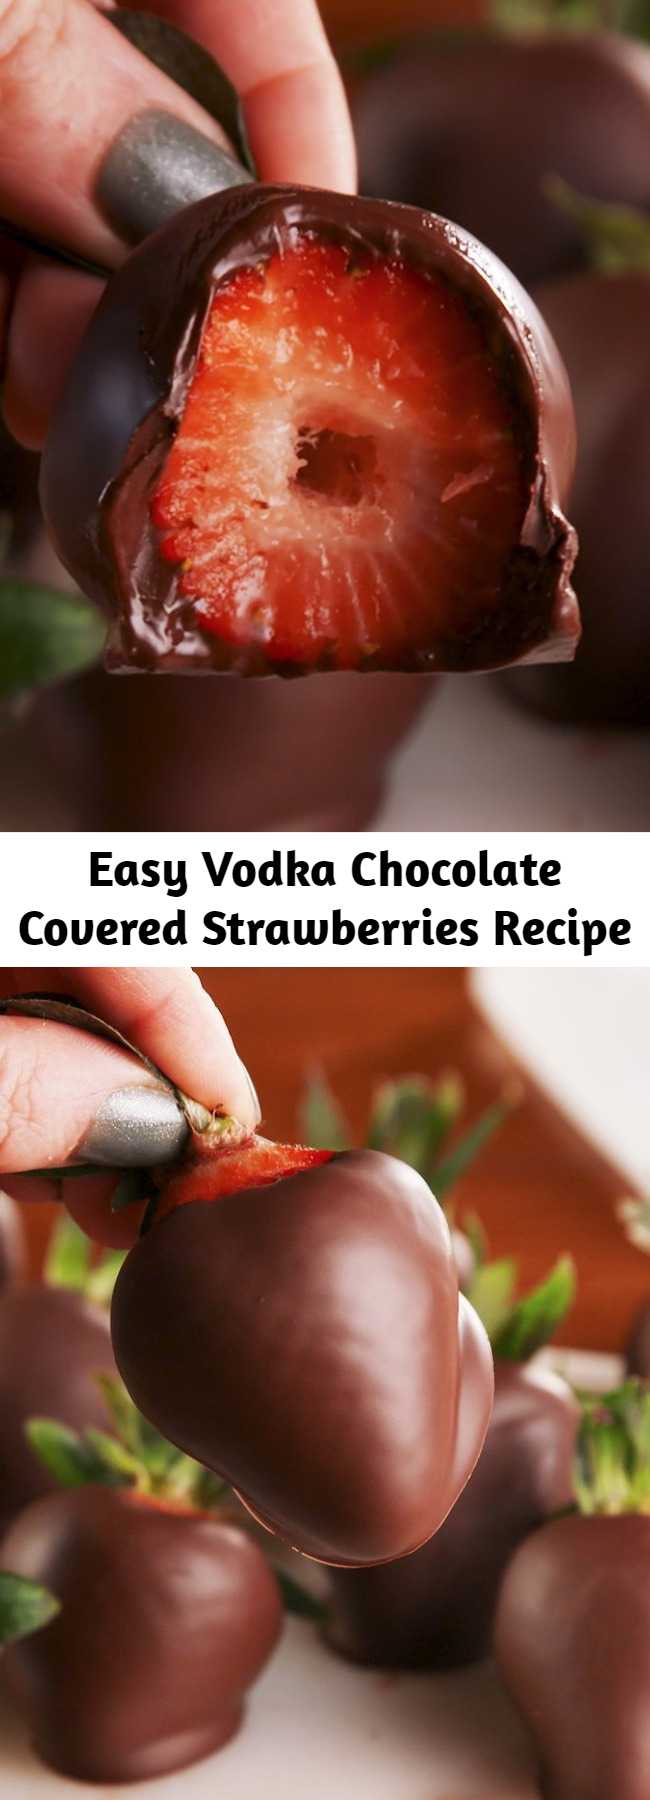 Easy Vodka Chocolate Covered Strawberries Recipe - Soaking your strawberries in vodka is the best gift you can give yourself. #easy #recipe #vodka #chocolate #strawberries #alcohol #adults #valentines #valentinesday #galentines #party #ideas #cute